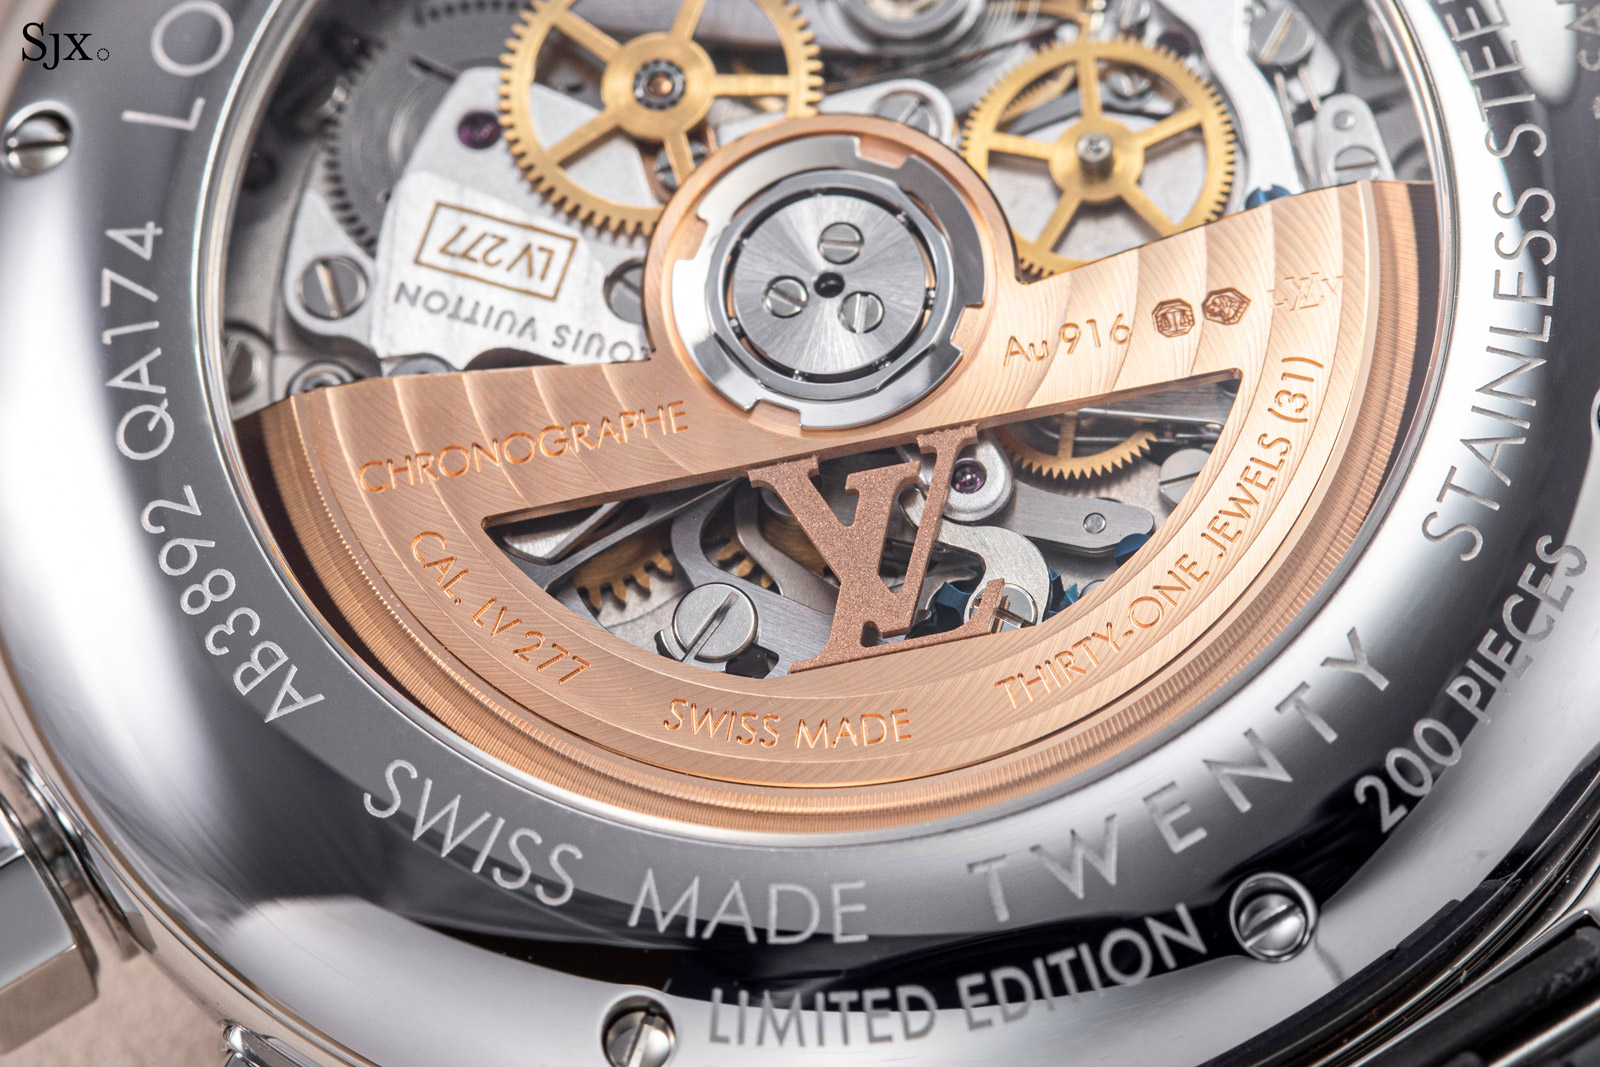 See Inside Louis Vuitton's Tambour Twenty Timepiece: Only 200 Made